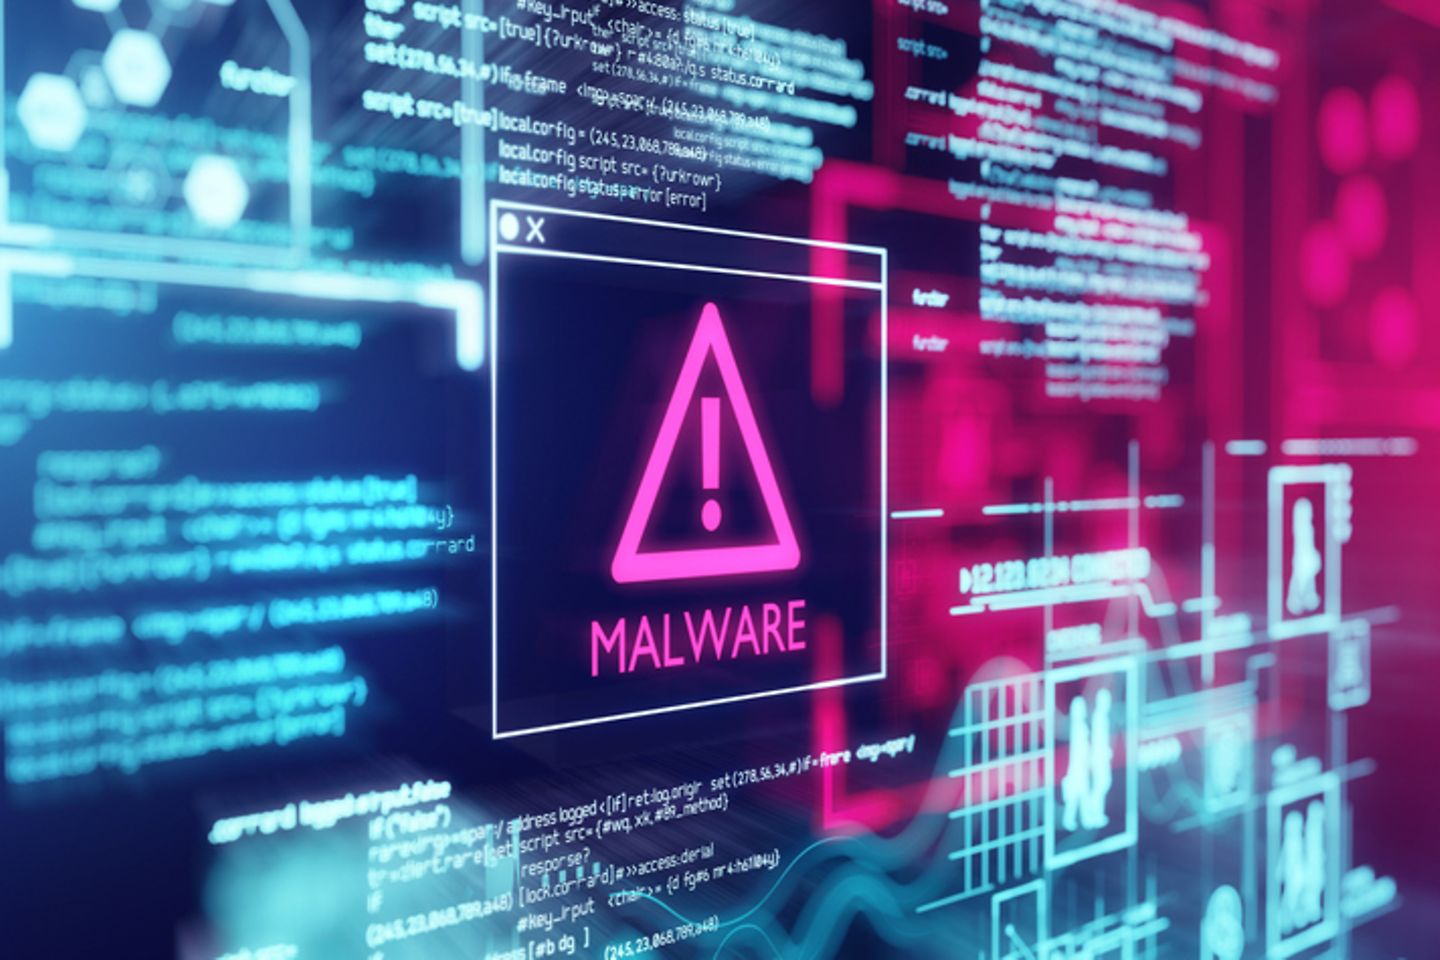 Display pops up on the warning triangle labeled Malware.